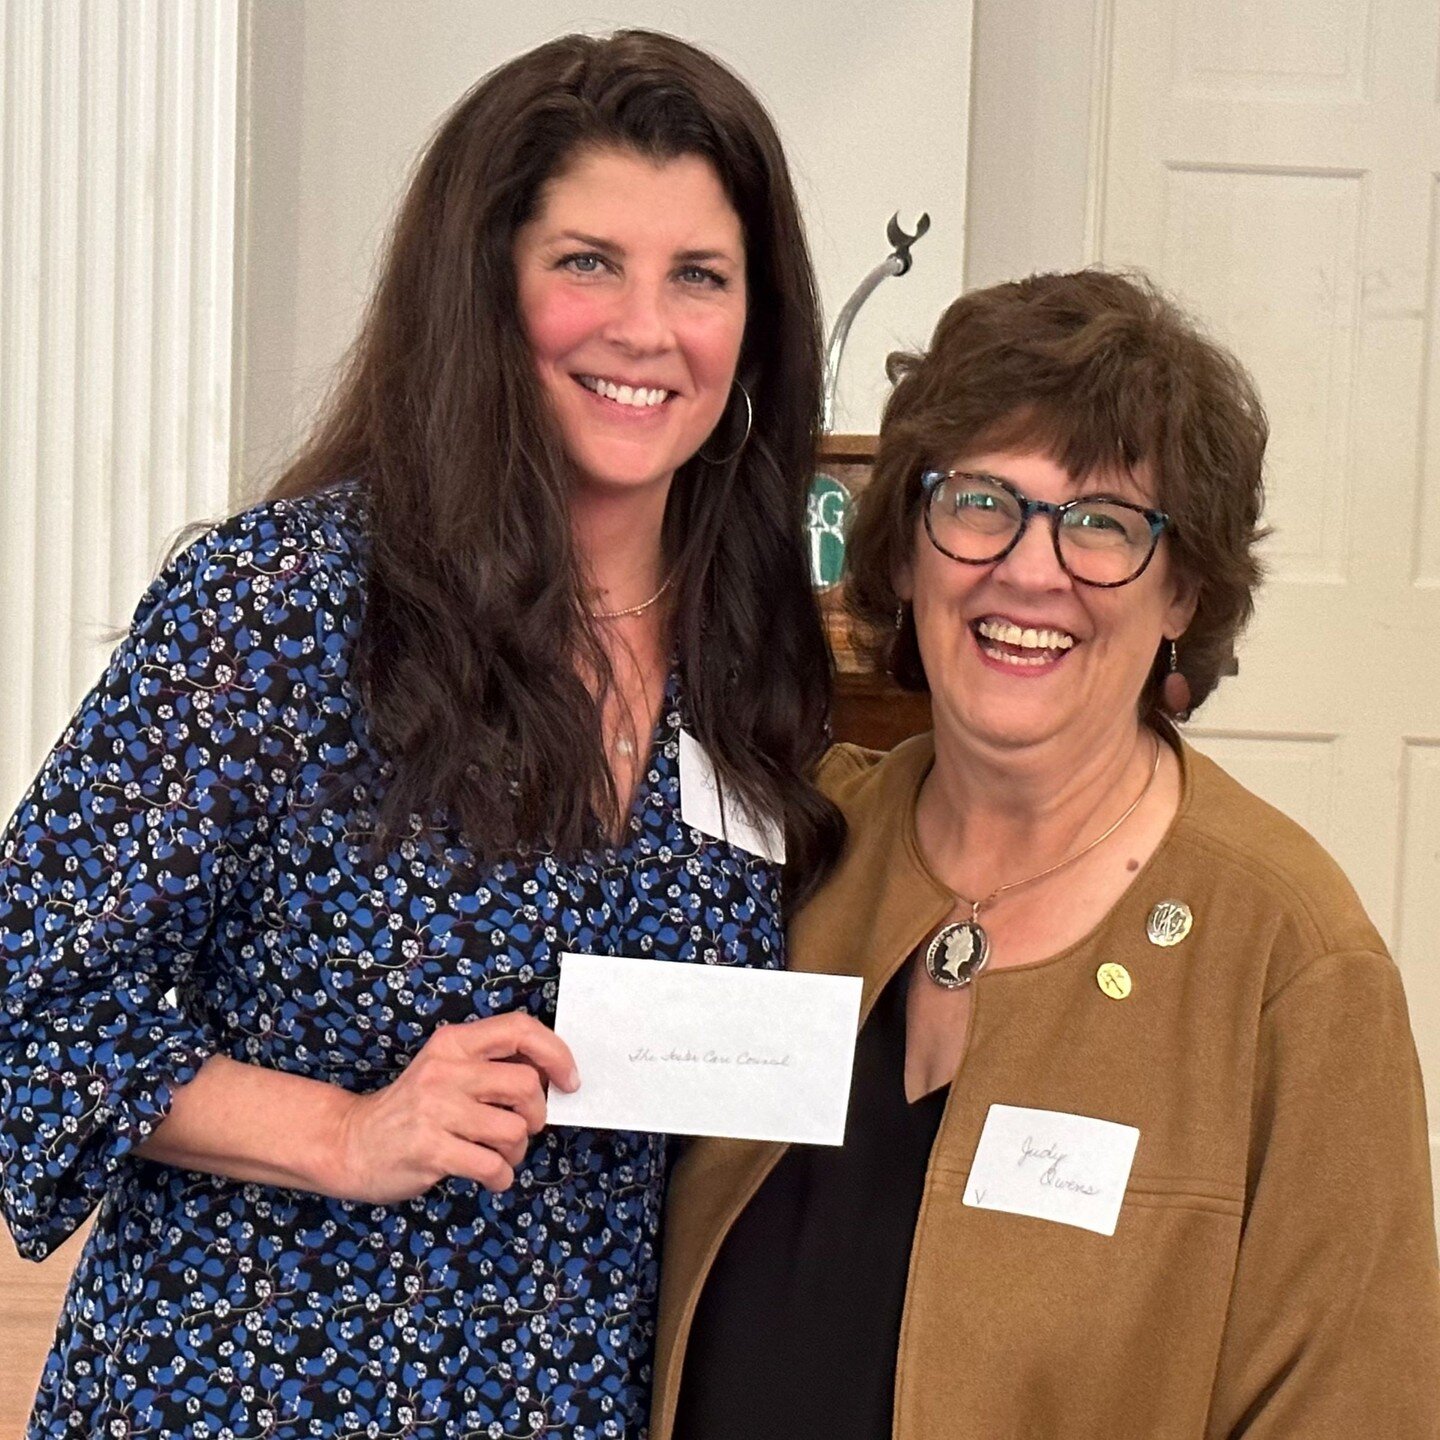 Lindy Hester accepts the Annual Grant Award on behalf of the Foster Care Council from WCCK President Judy Owens at the annual meeting in May 2023. Congratulations to the Foster Care Council!